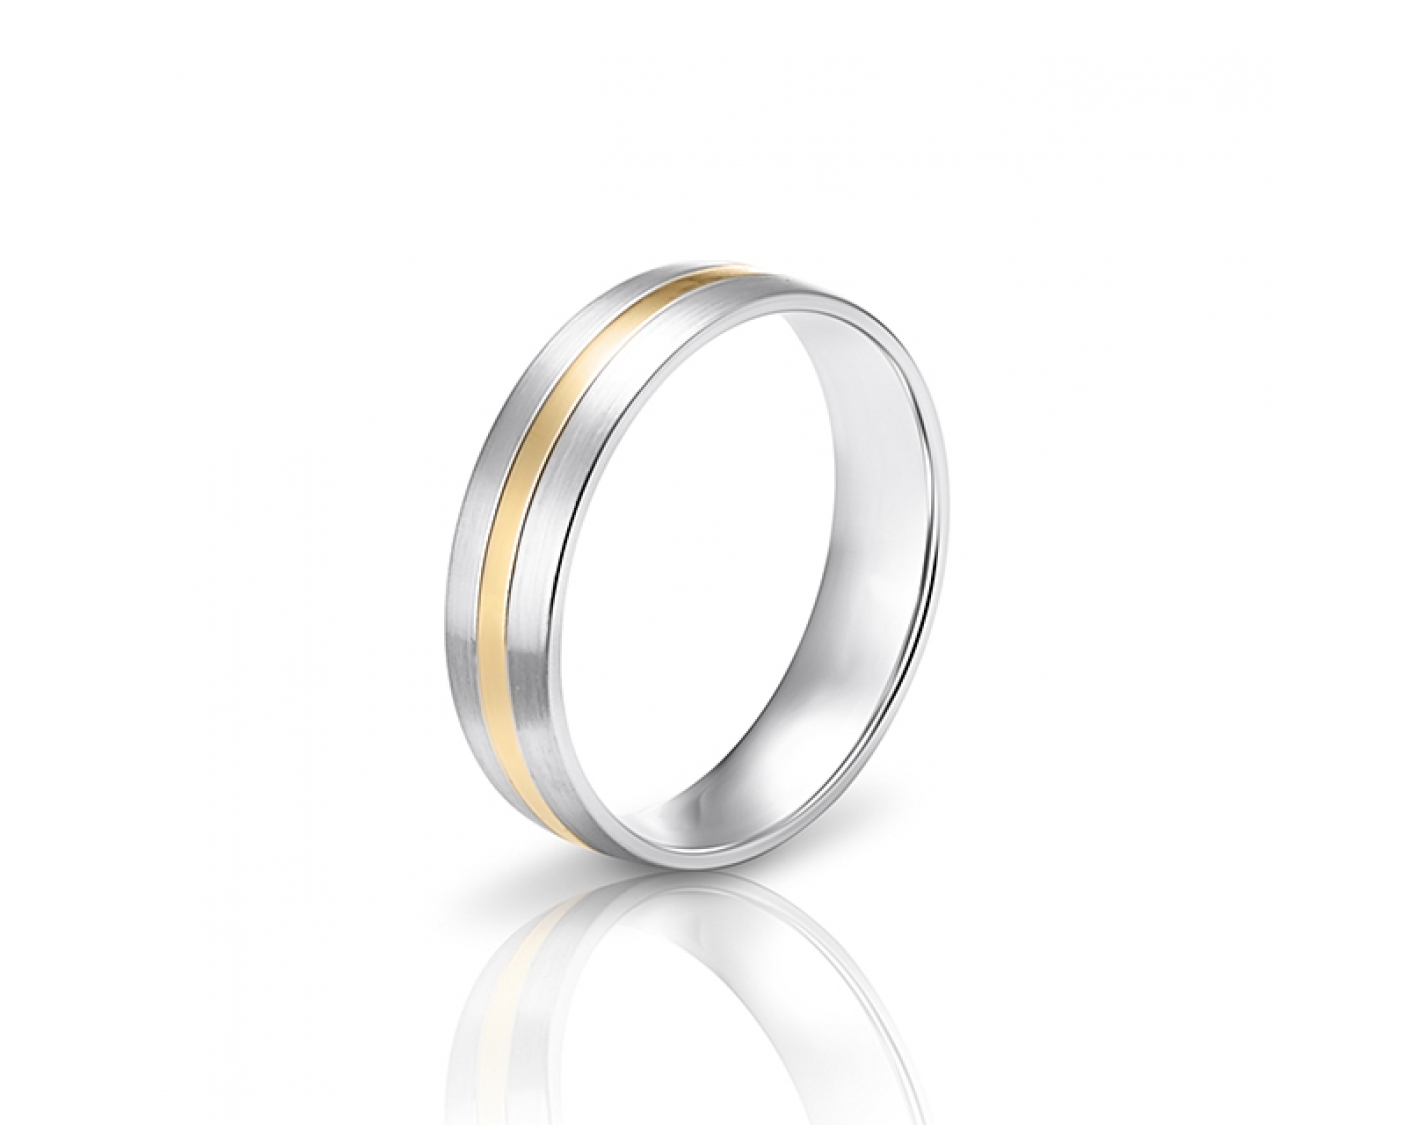 dual-tone 5,2mm two-toned* wedding band Photos & images